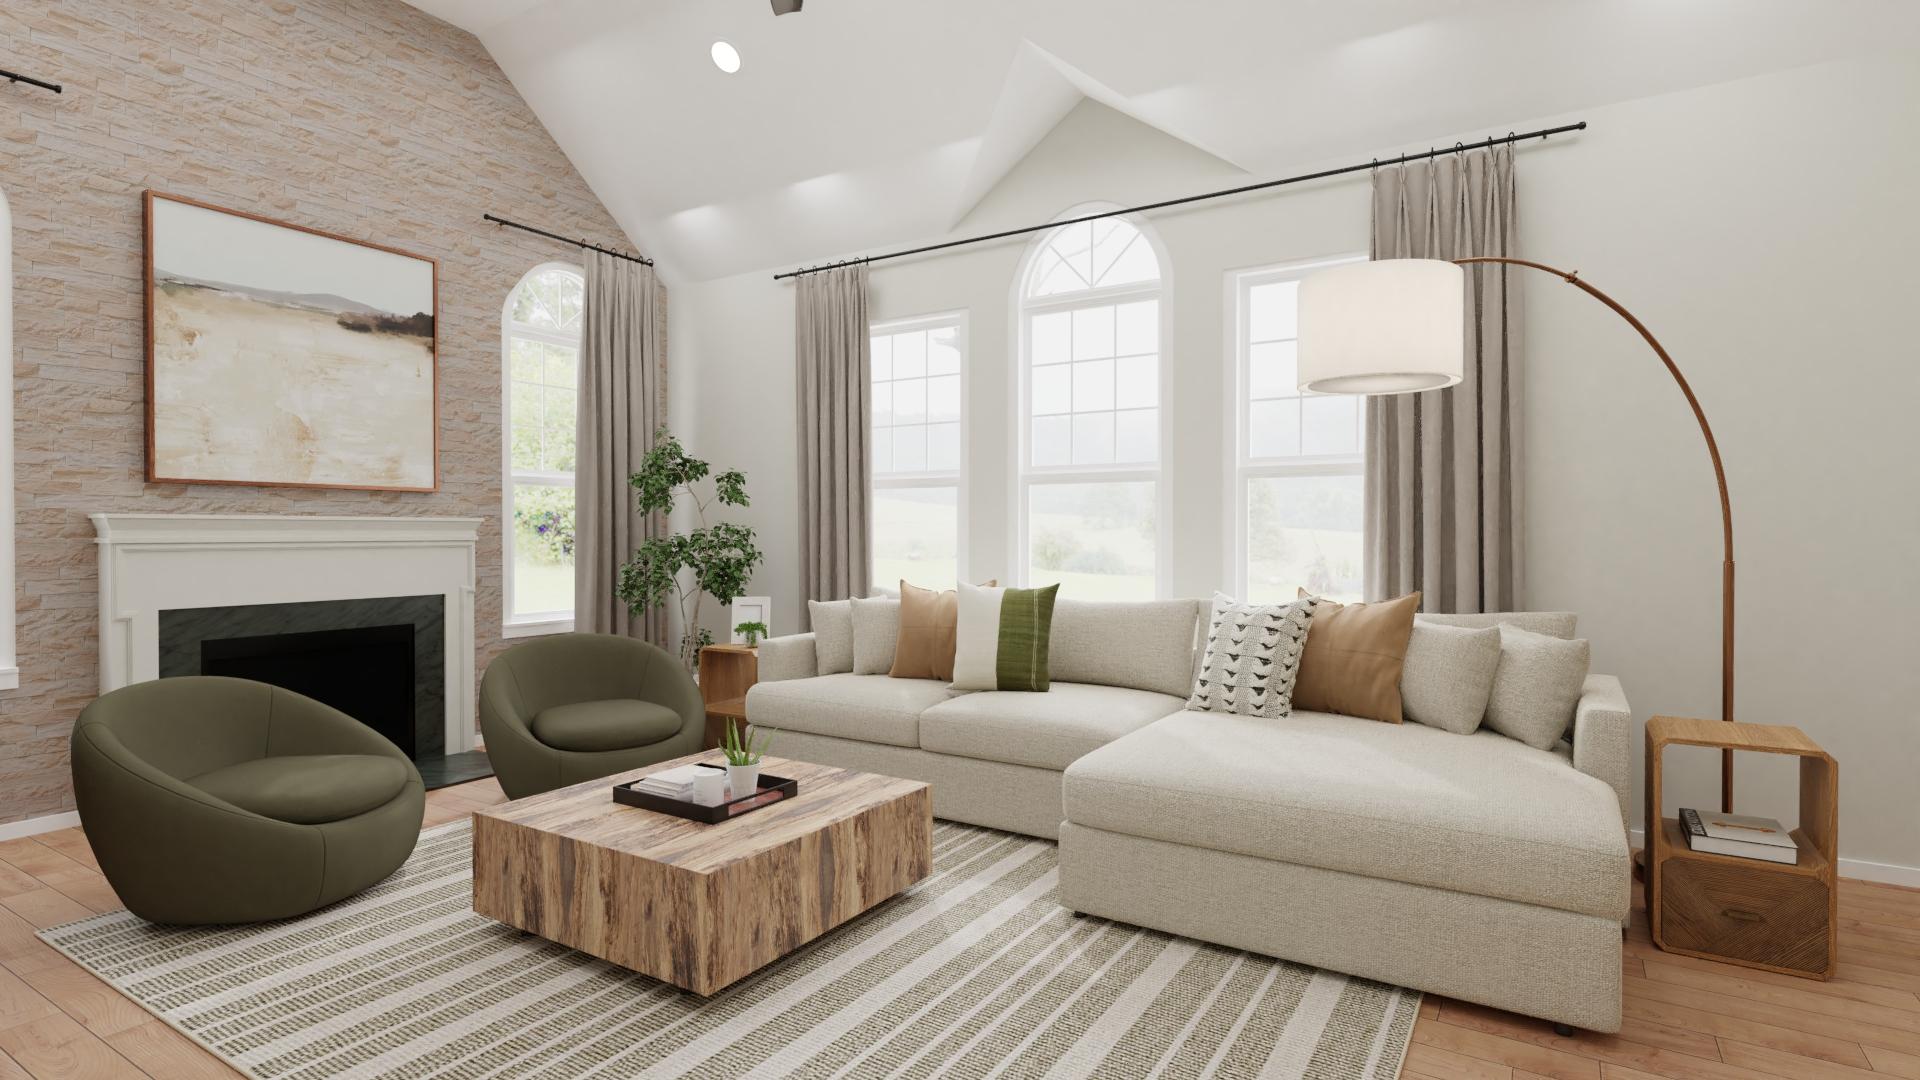 Transitional Rustic Living Room with Large Cozy Sectional